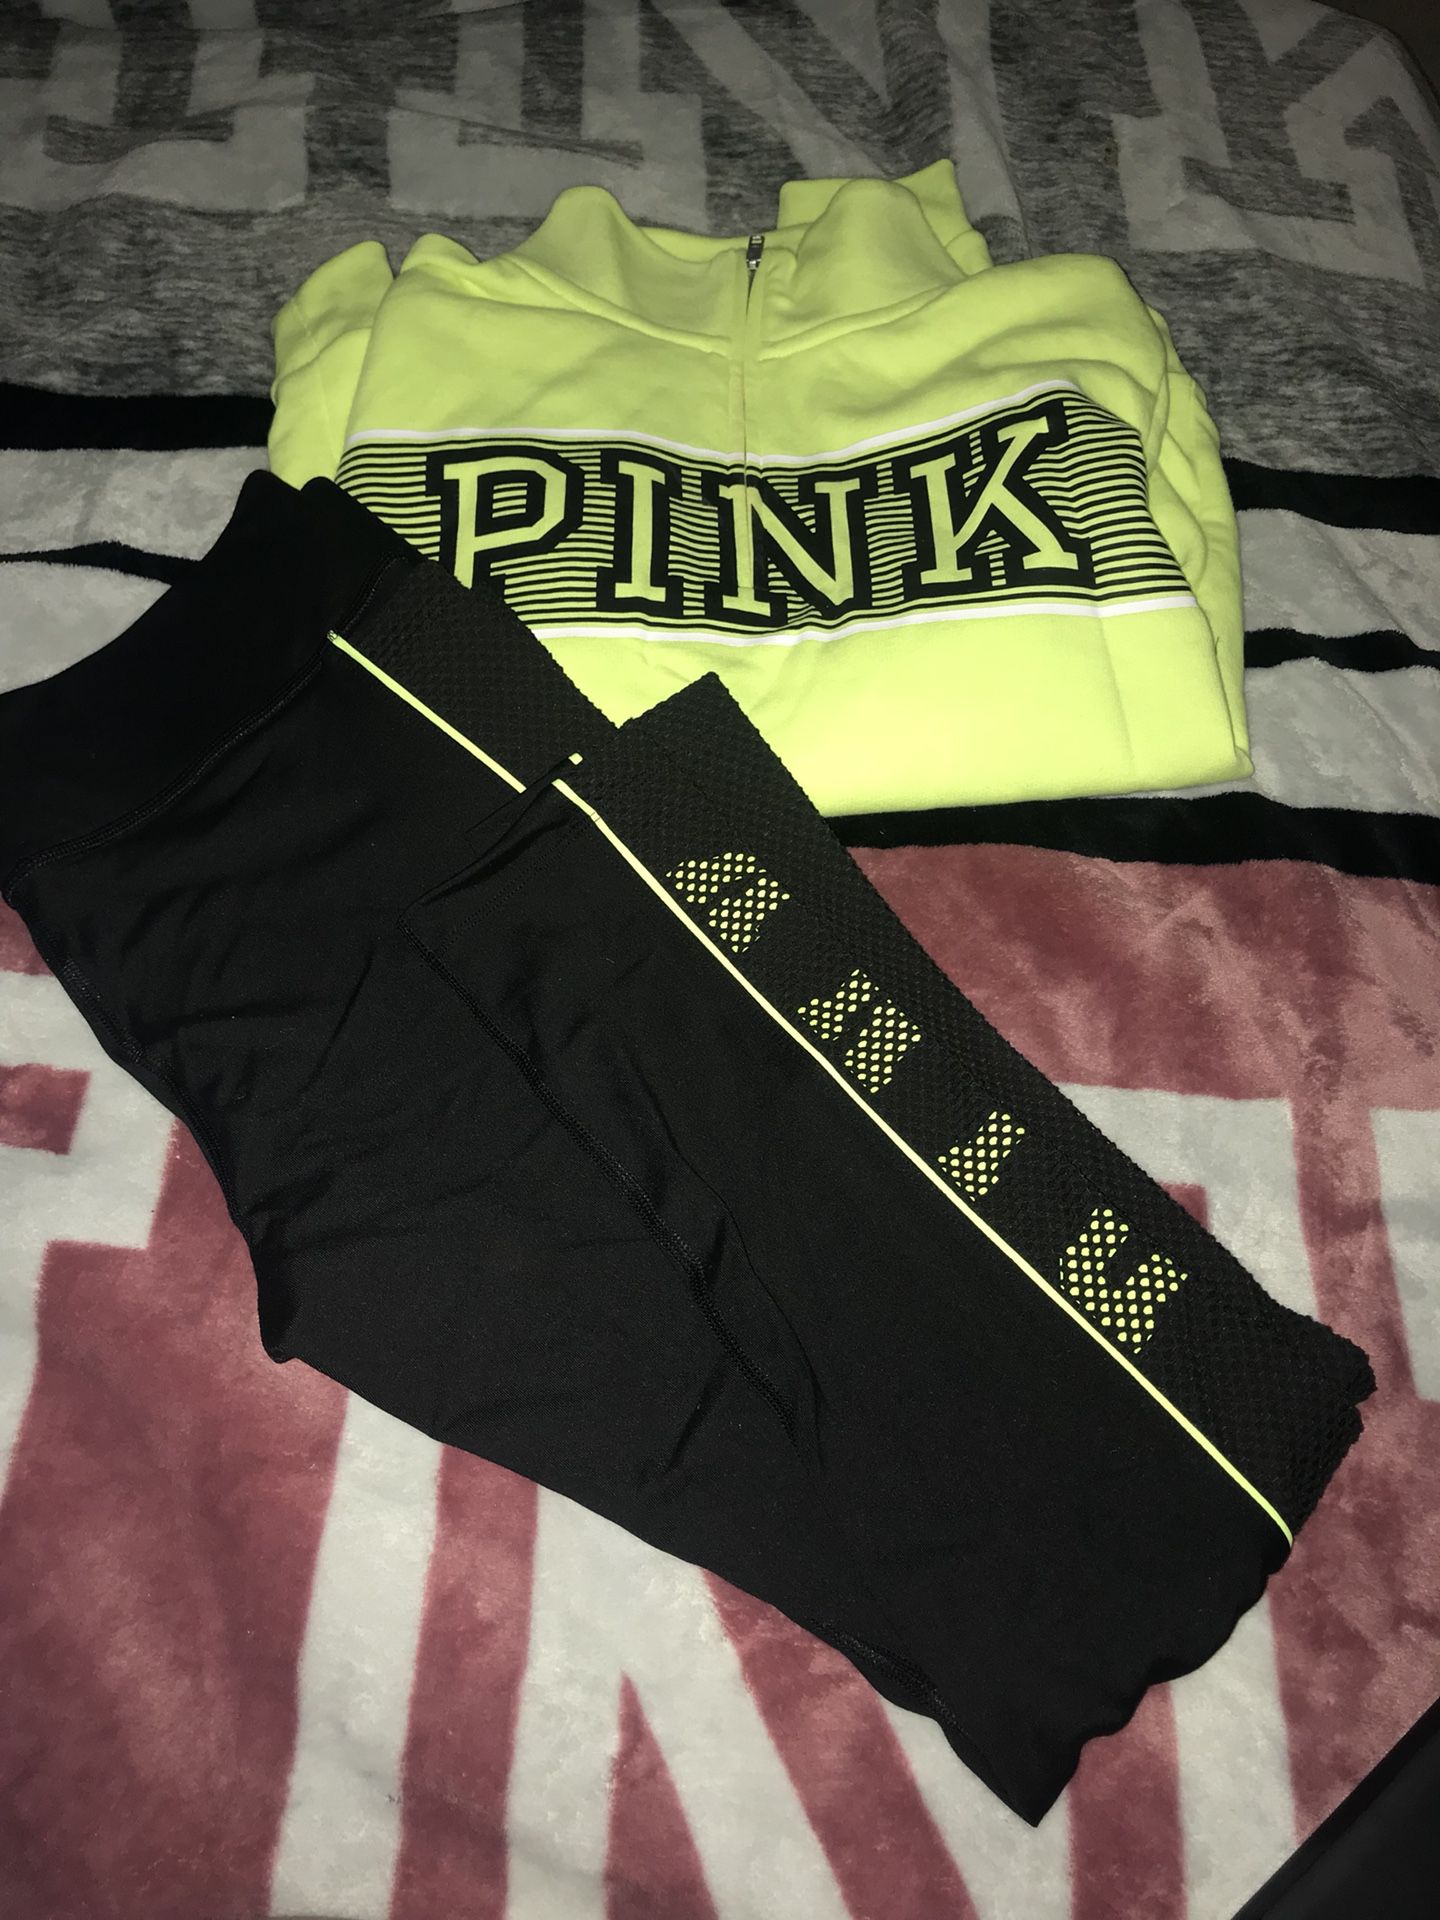 BRAND NEW Victoria secret pink sweater and leggings outfit size large